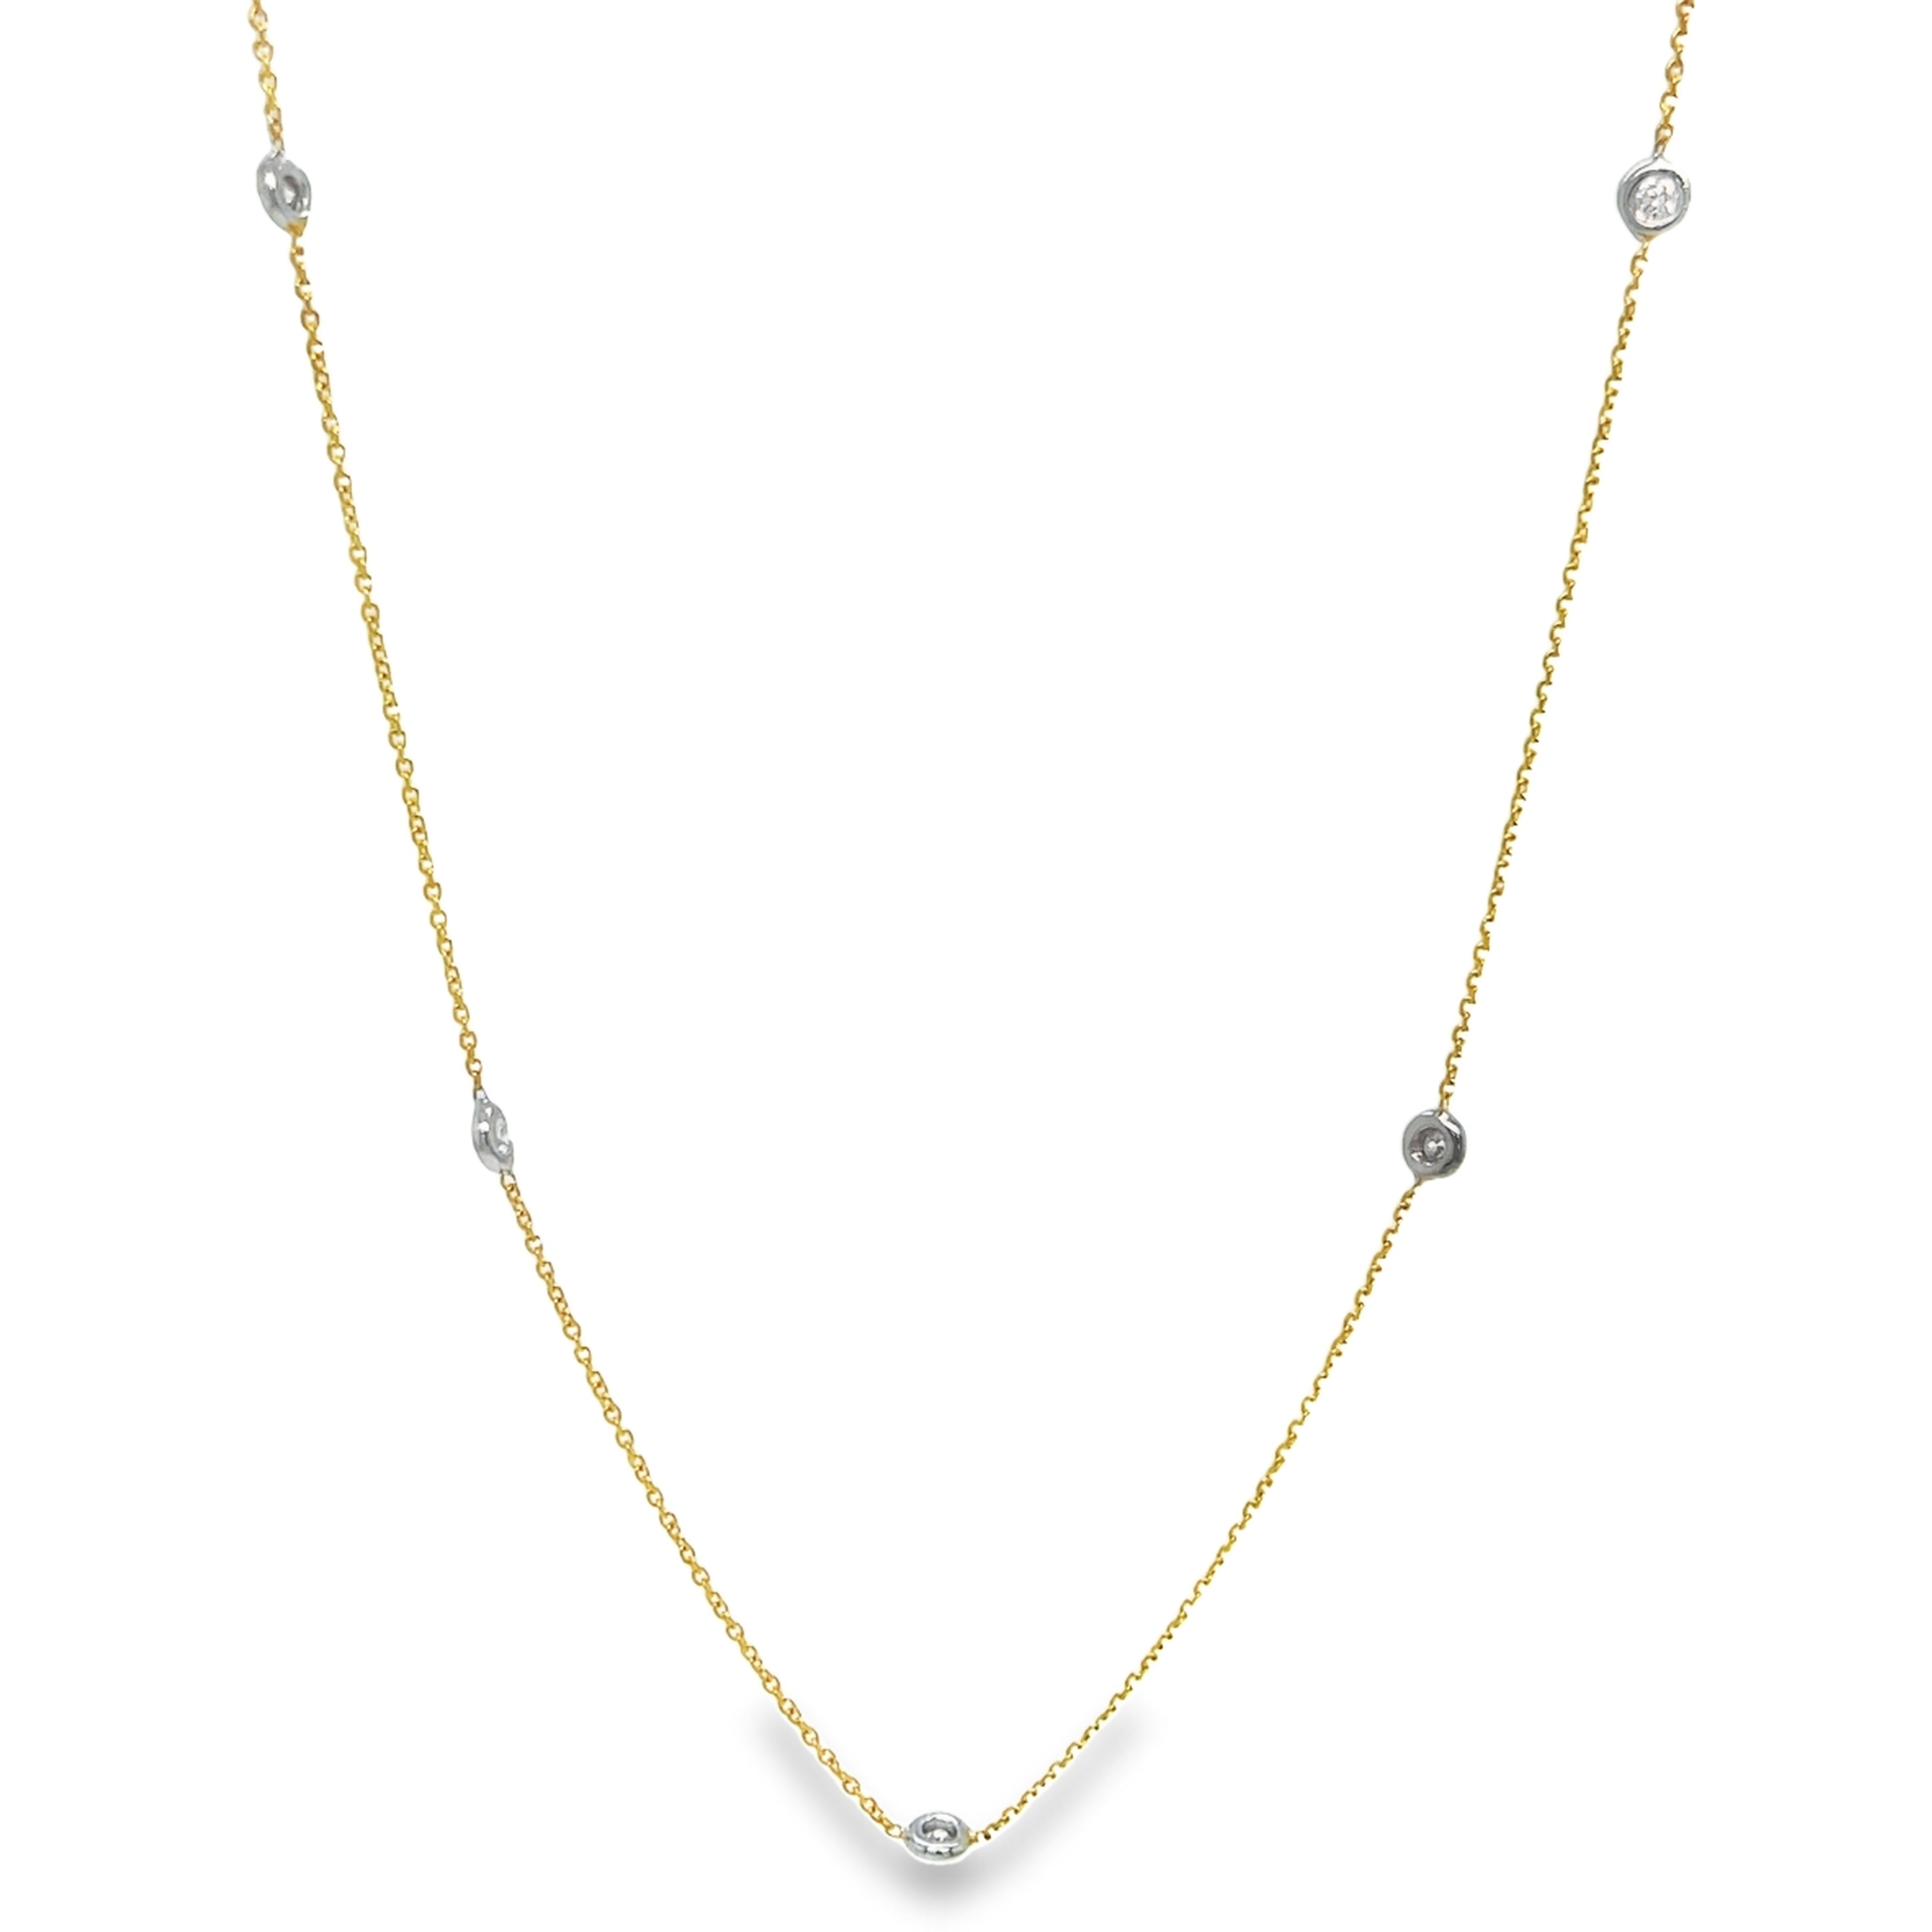 Experience timeless elegance with our Diamond by the Yard Necklace. Adorned with a dazzling round diamond totaling 0.15 carats, this necklace is securely bezel set in 18k white &amp; yellow gold. The 18-inch-long chain features a secure catch, ensuring it stays in place all day. Add a touch of sophistication to any outfit.